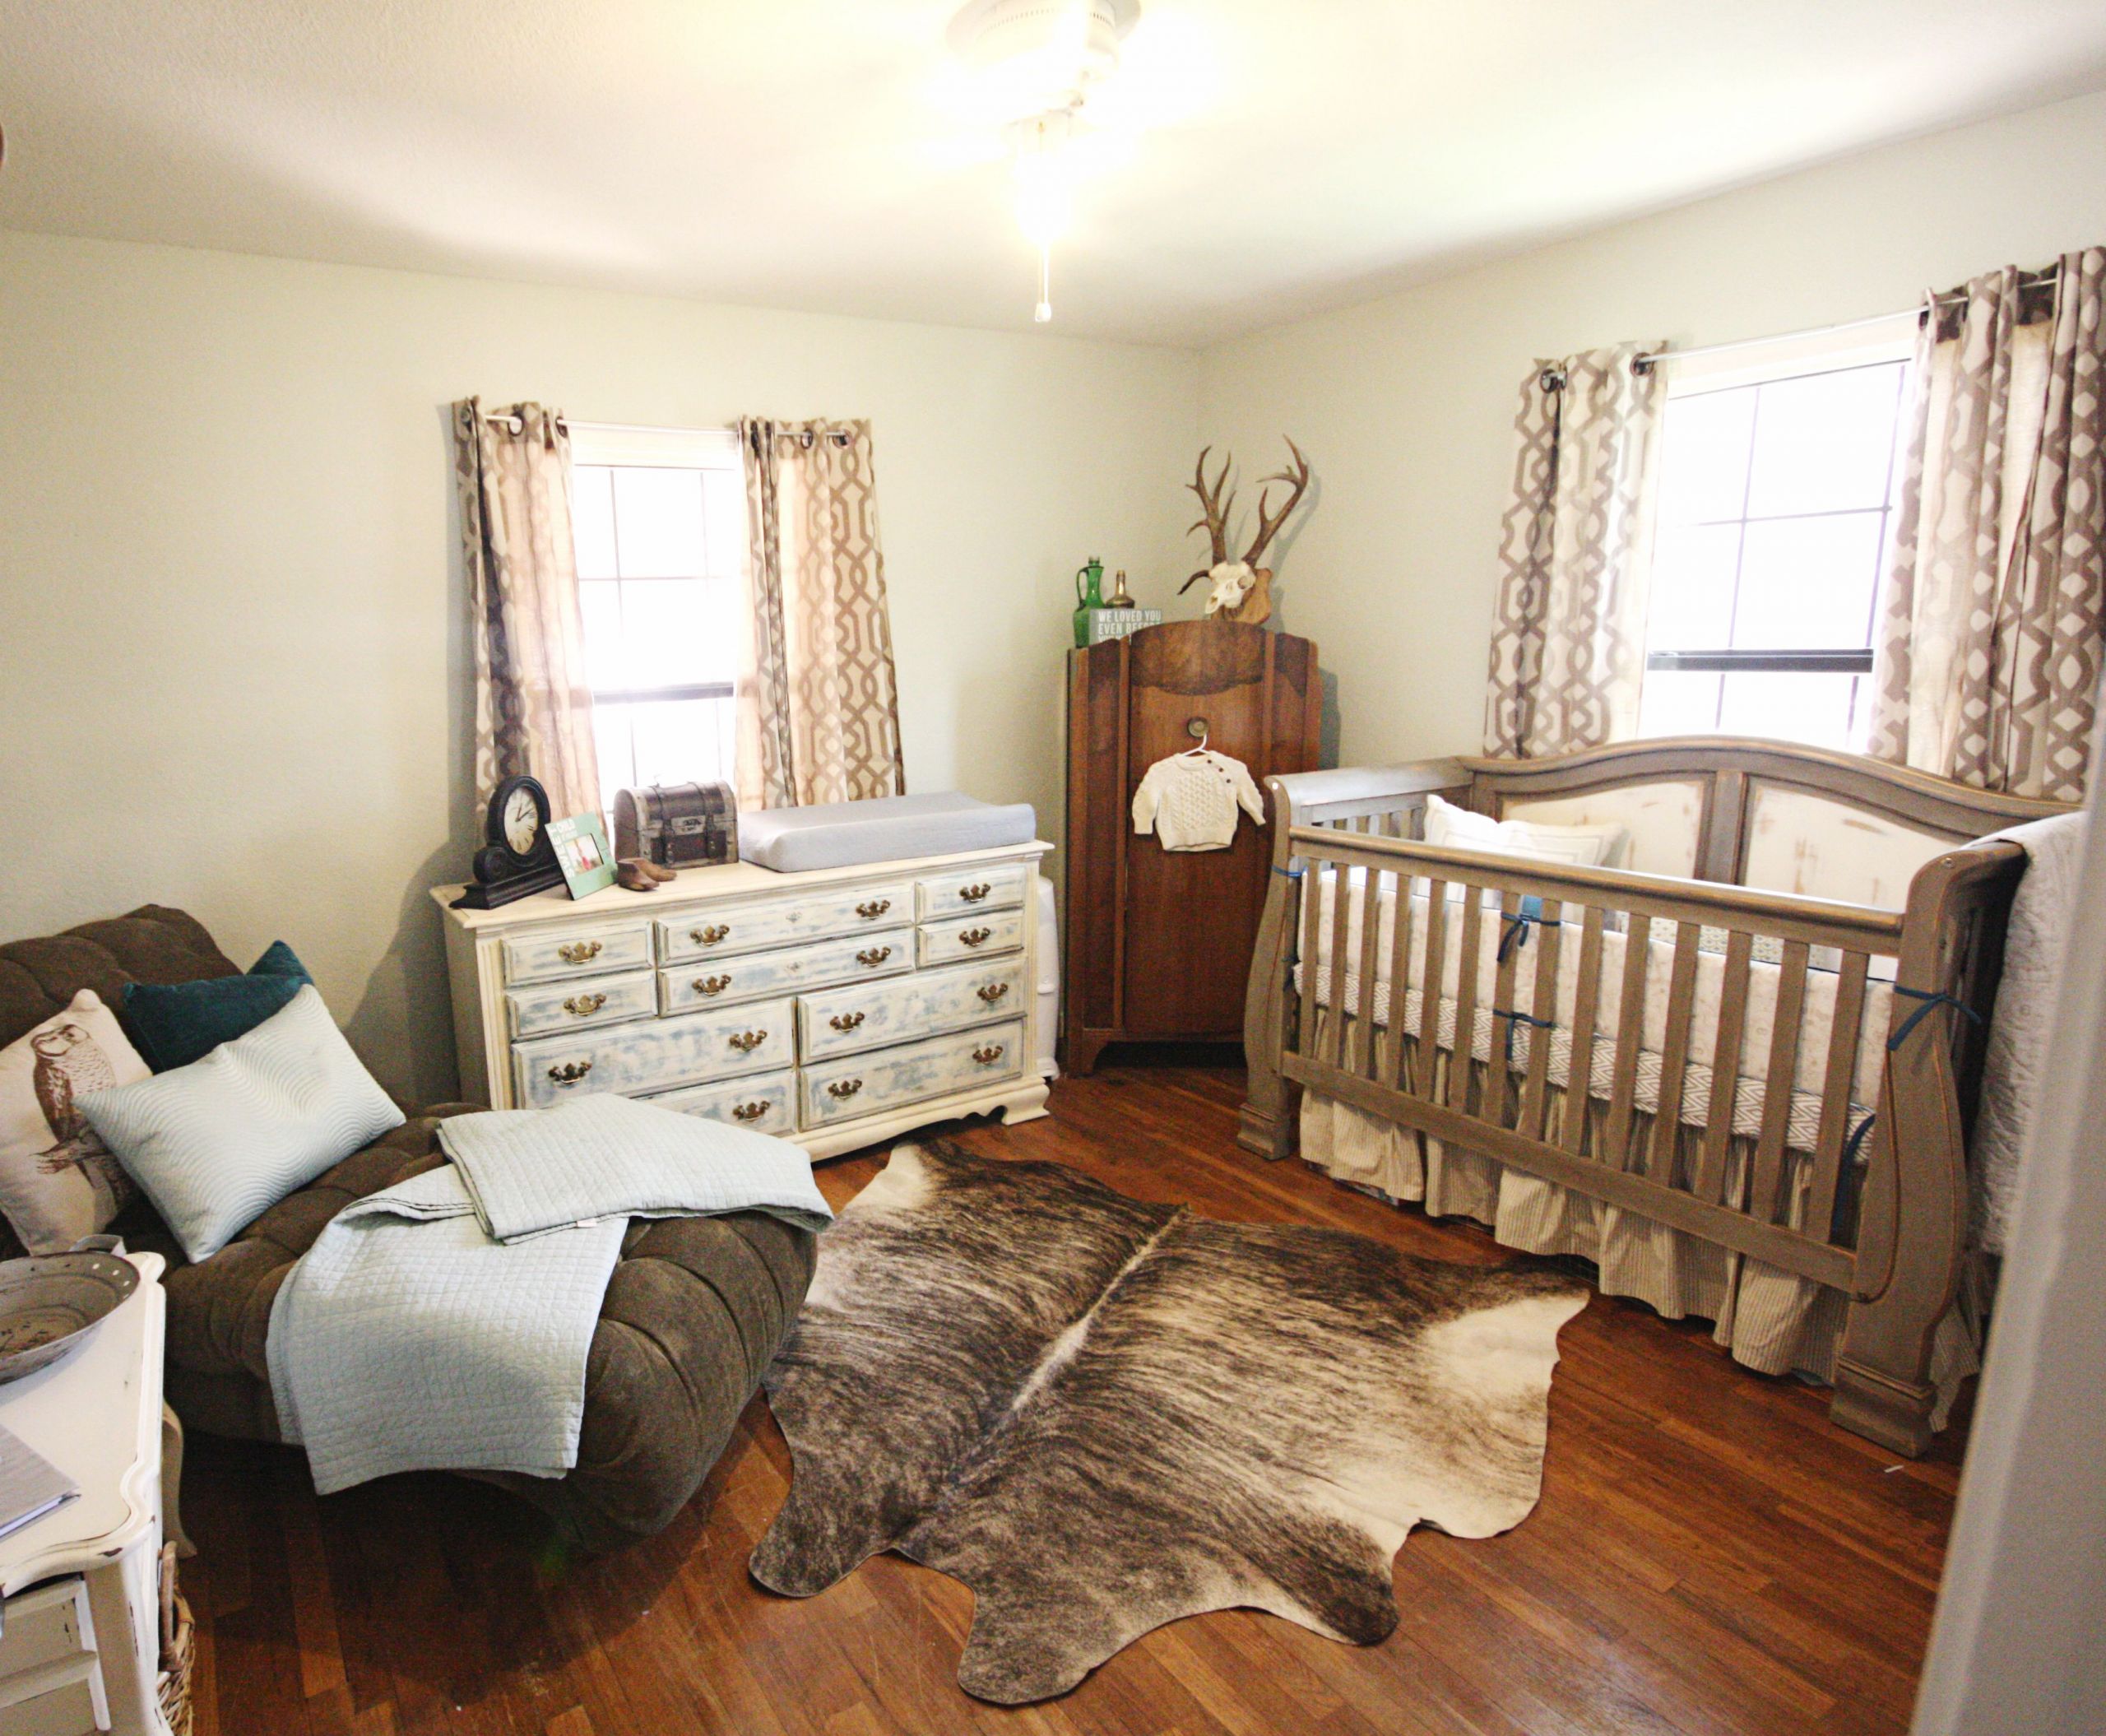 Rustic Baby Bedroom
 8 Baby Rooms For Little Cowboys And Girls You’ll Want In